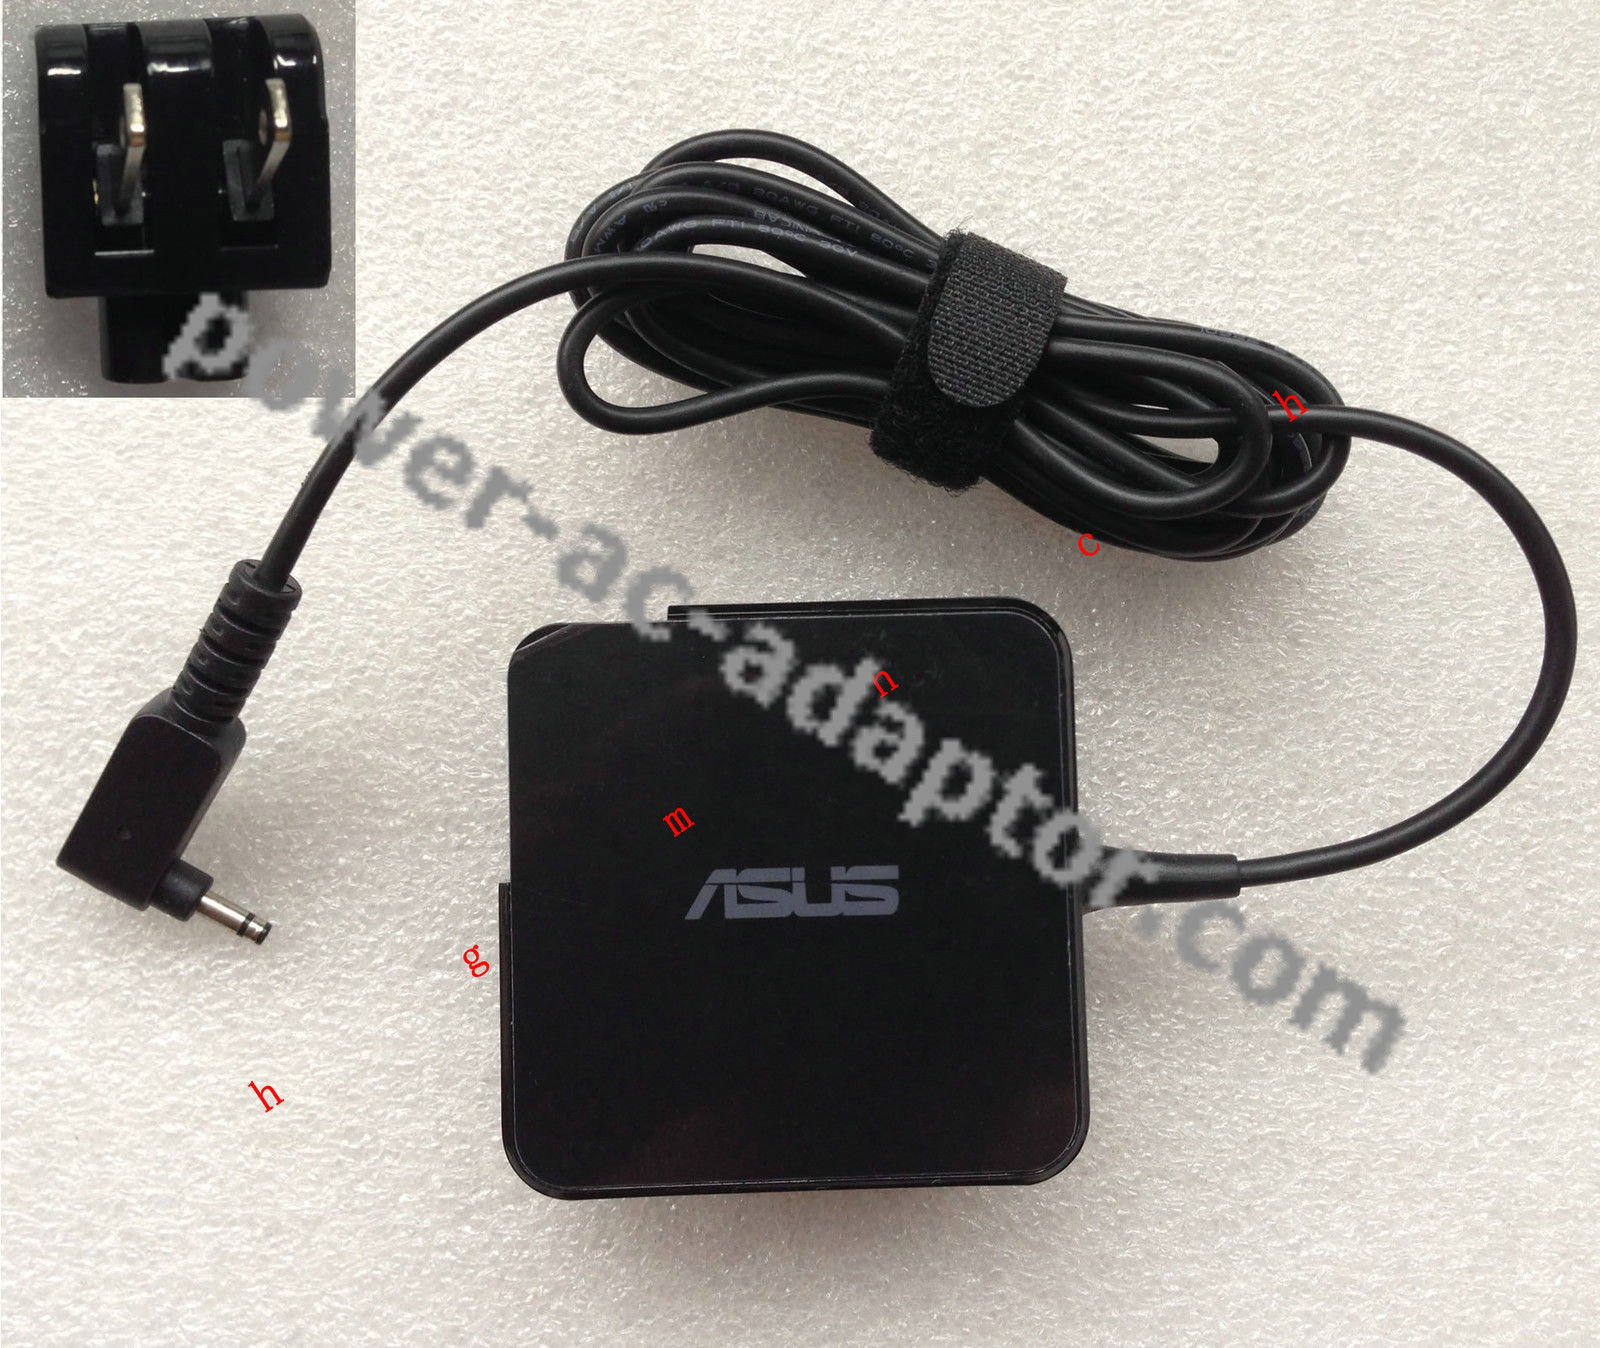 ASUS 45W AC Adapter for ASUS Zenbook UX31E-RY008V Ultrabook